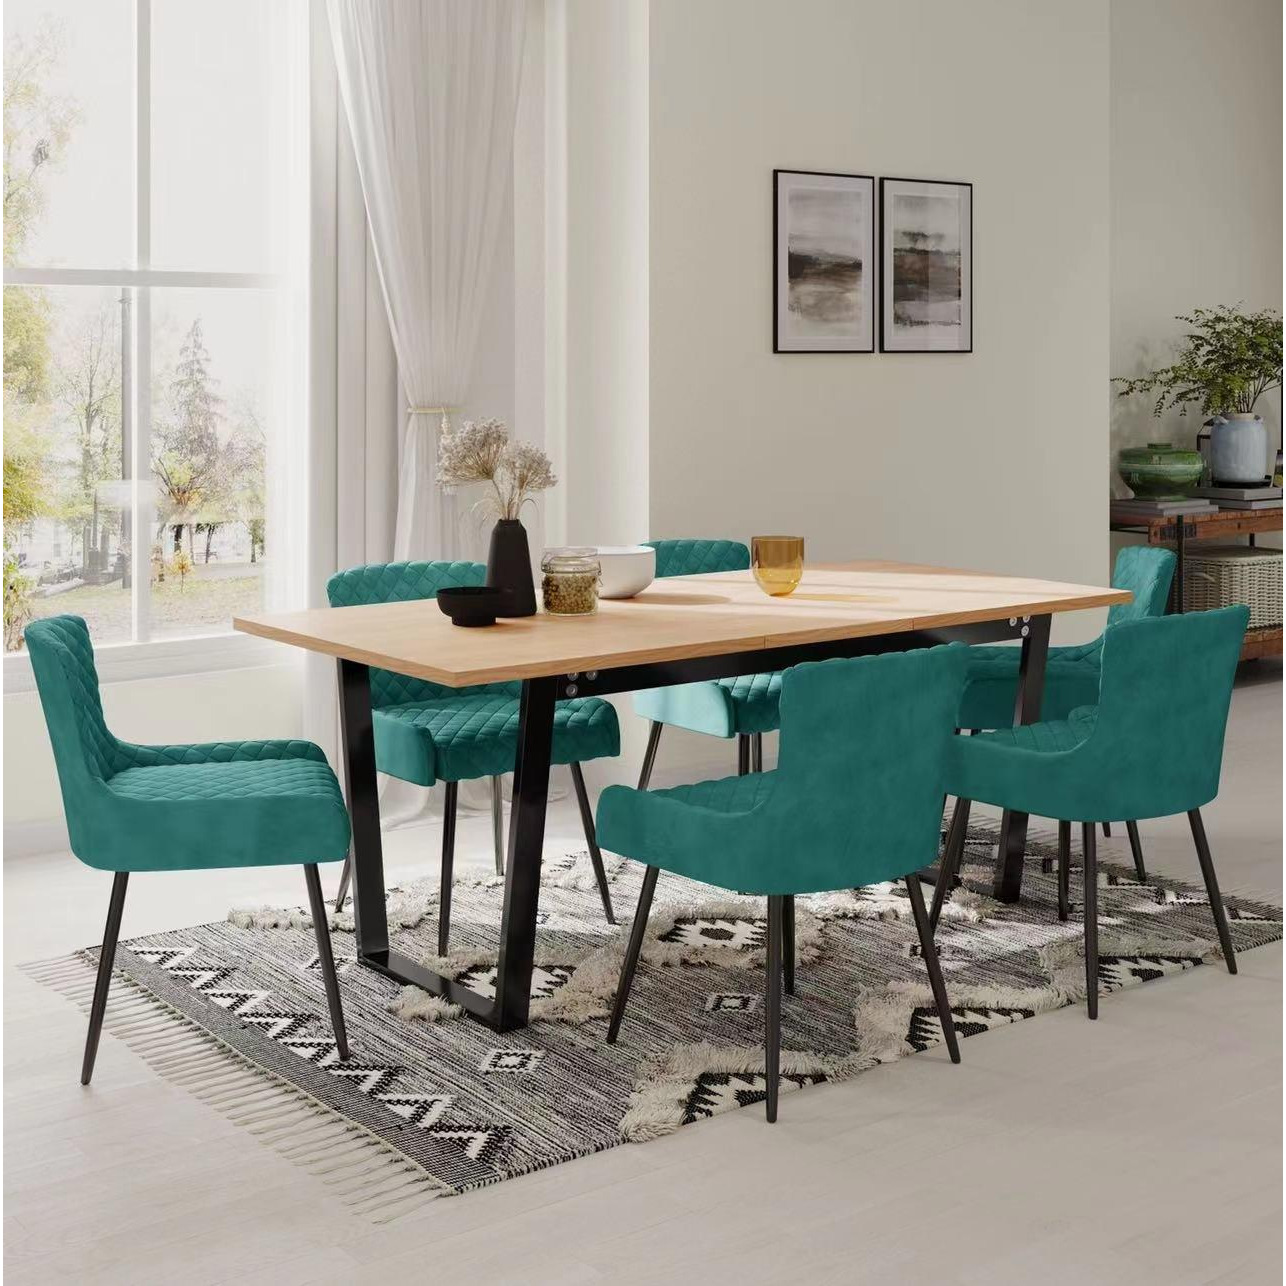 Belluno Extending Dining Table Set with 6 Velvet Chairs - image 1